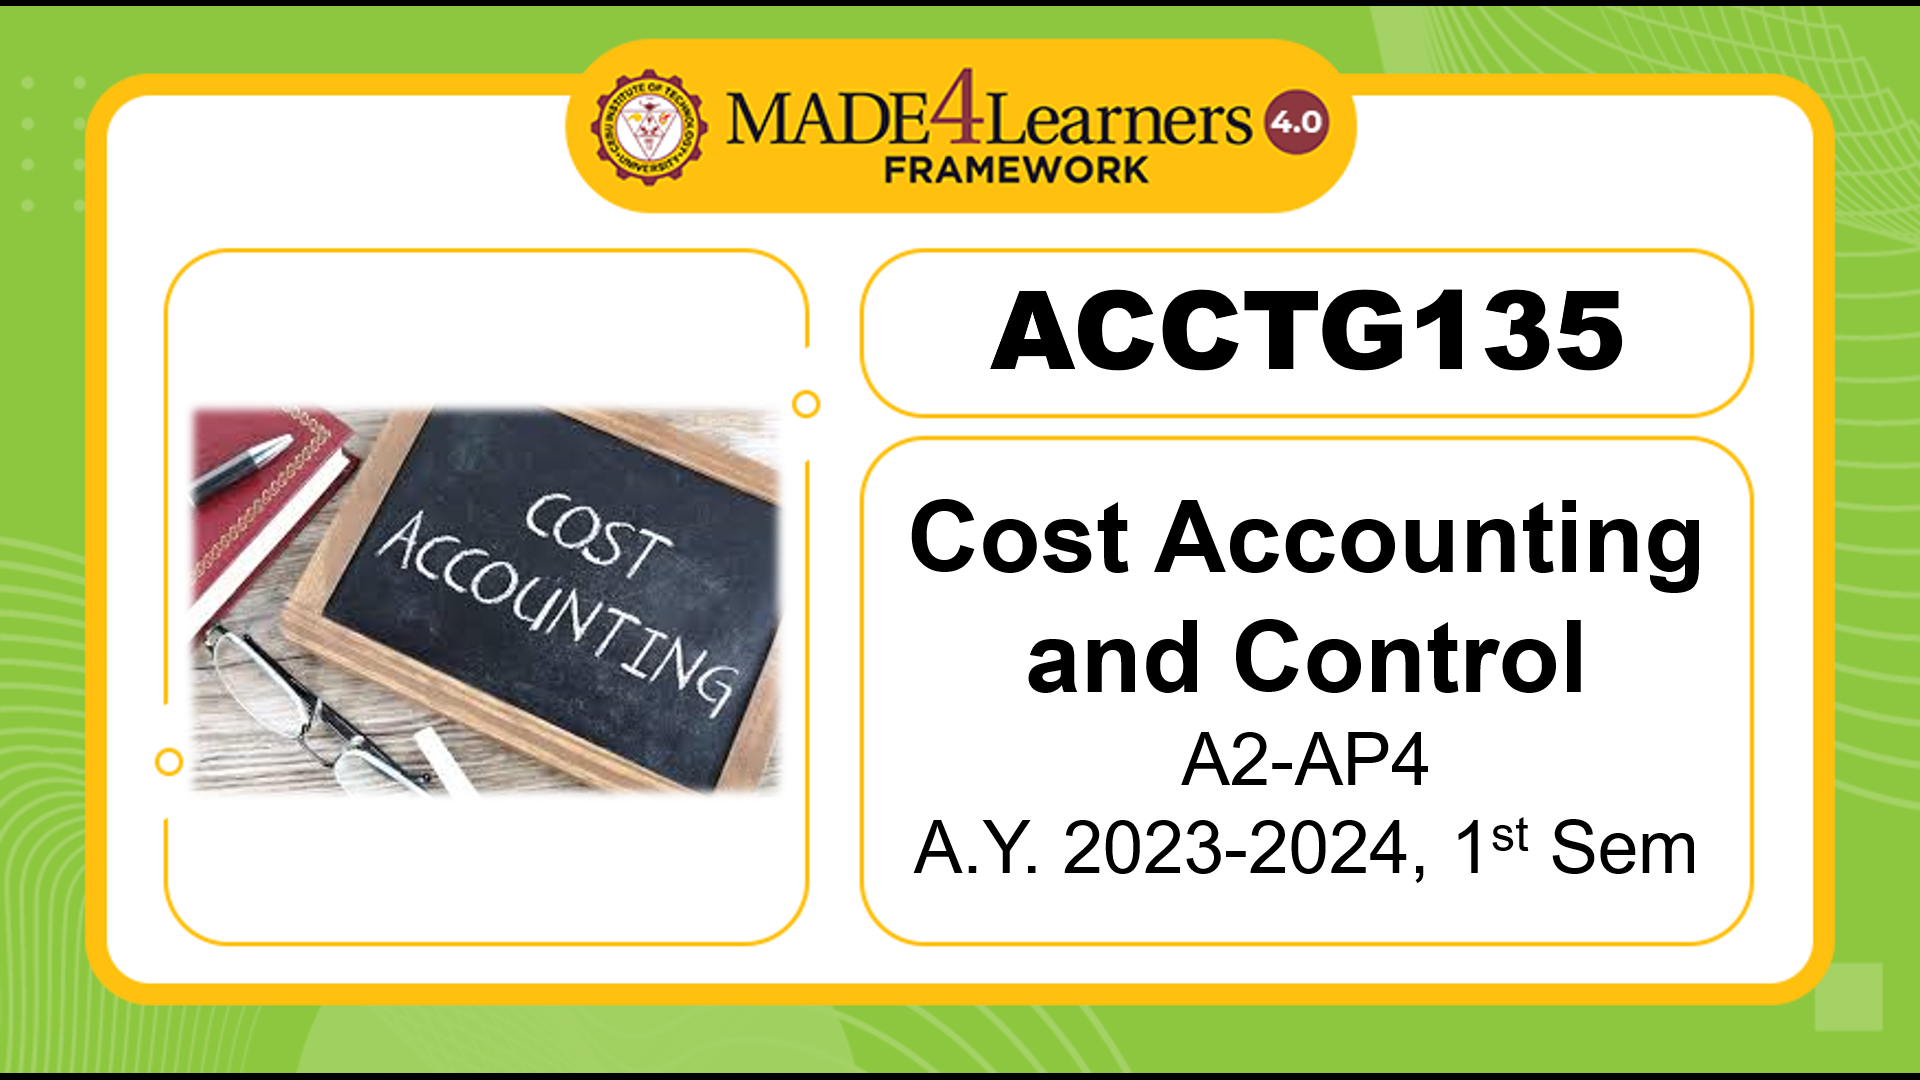 AY23-24 1stSem ACCTG135 A2-AP4 Cost Accounting and Control